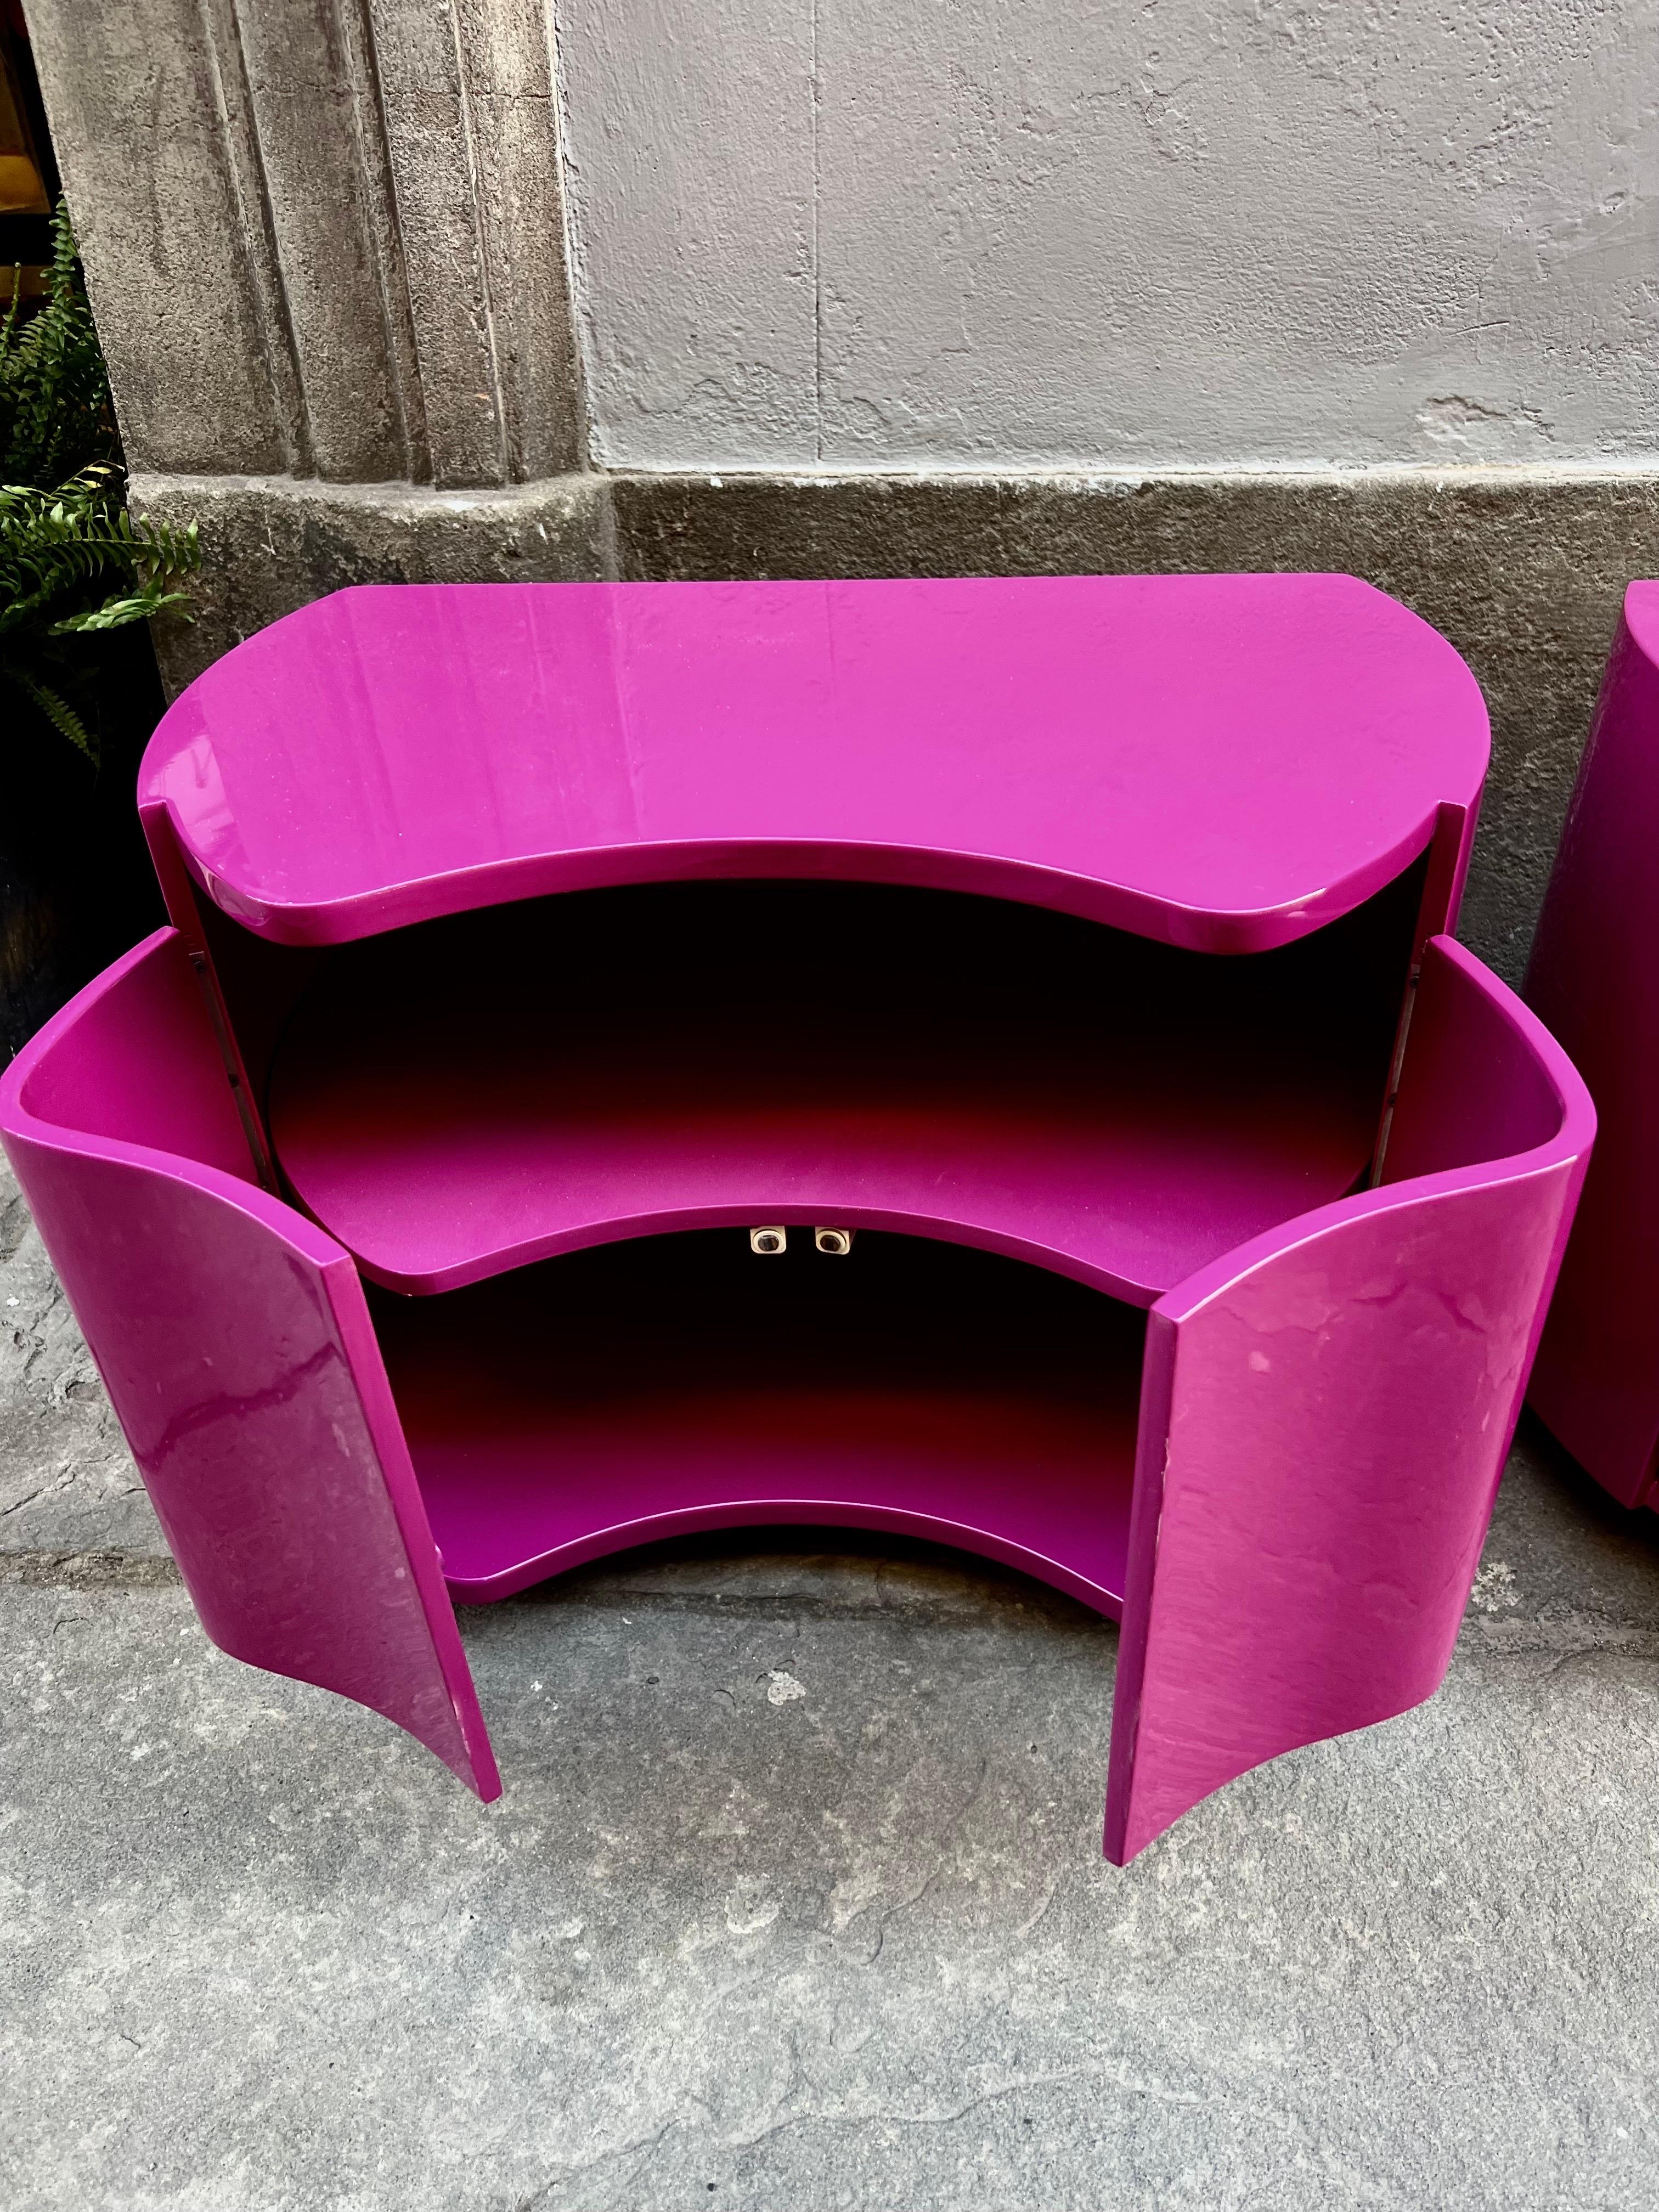 Pair of Cyclamen Colour Lacquered Resin Night Stands by Benatti Italy, 1966 For Sale 11